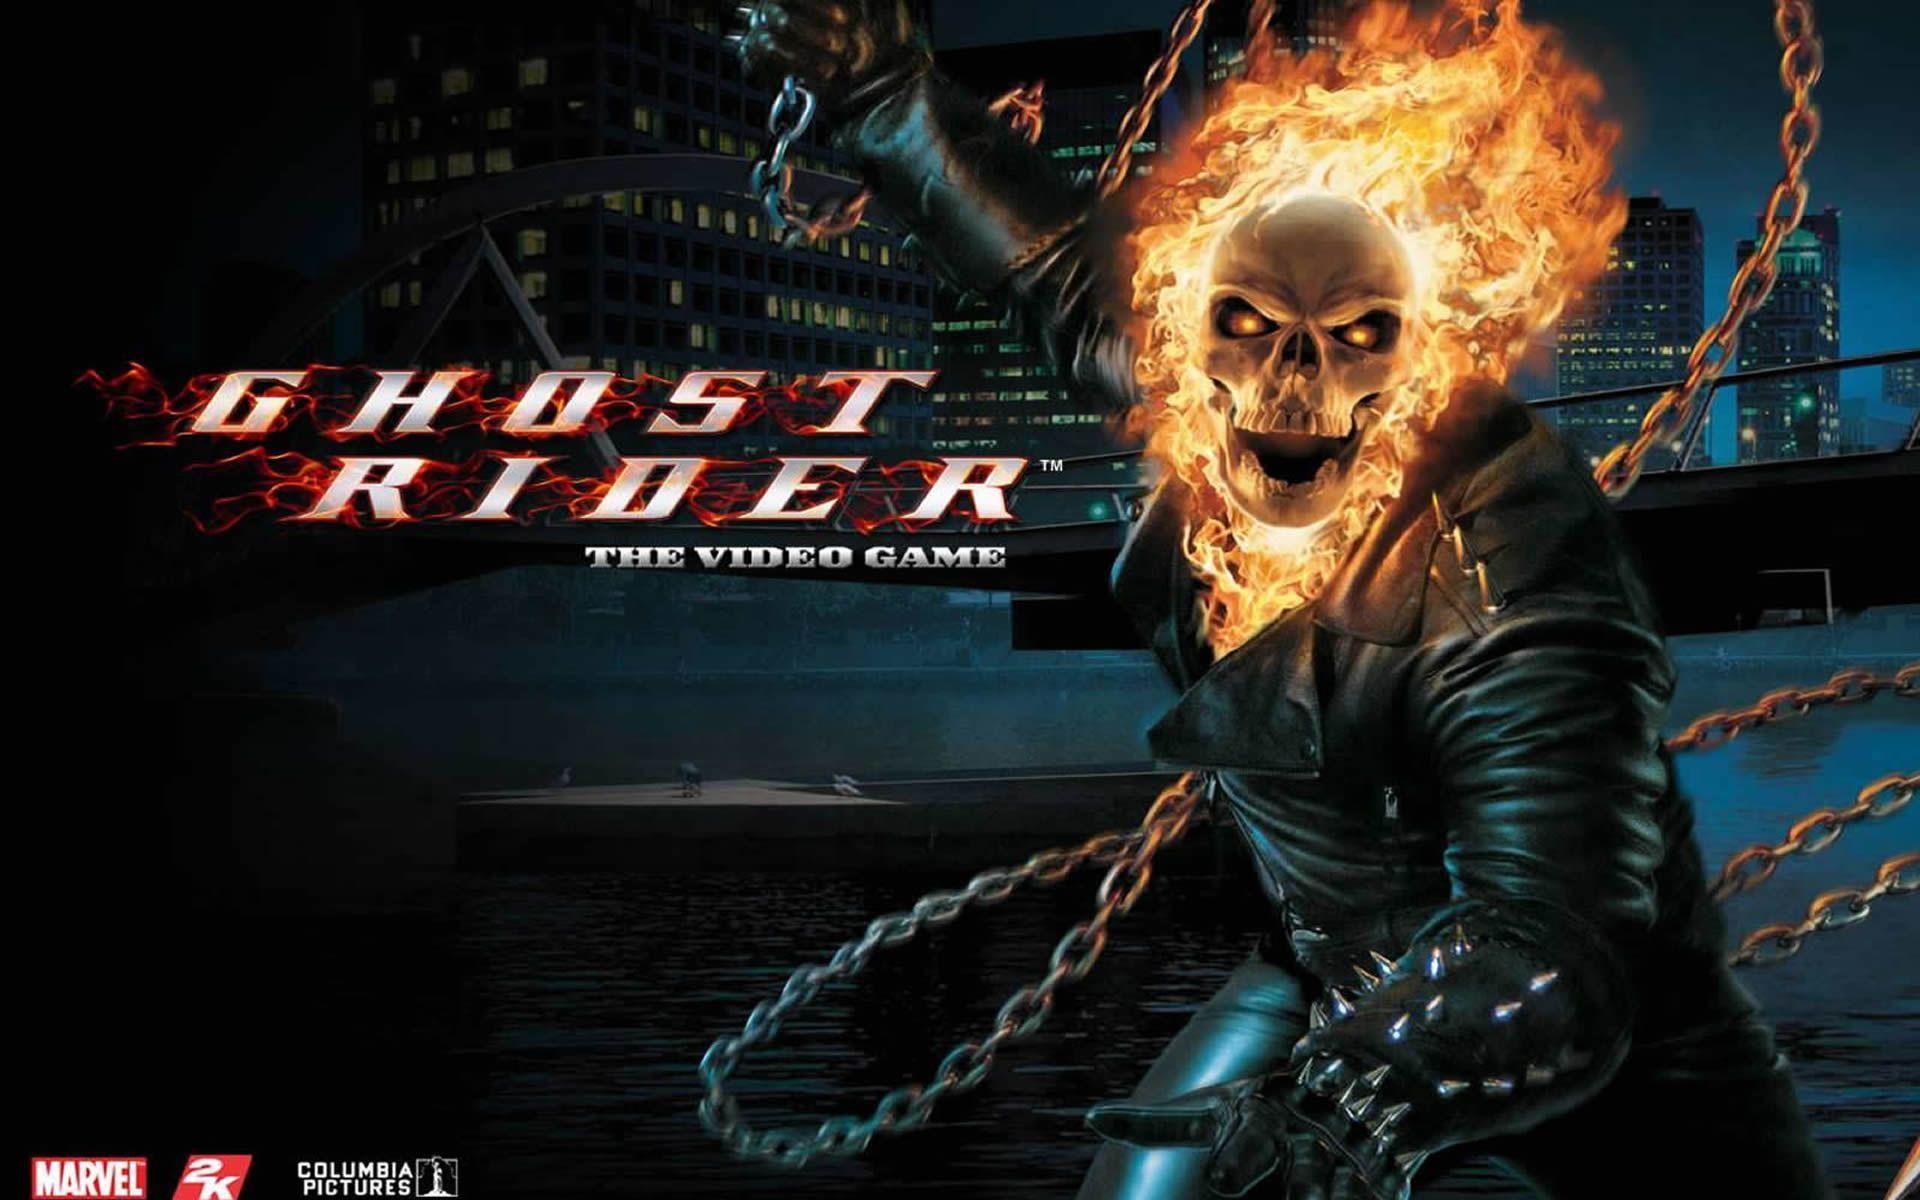 Flaming Skull Games Wallpaper Image featuring Ghost Rider